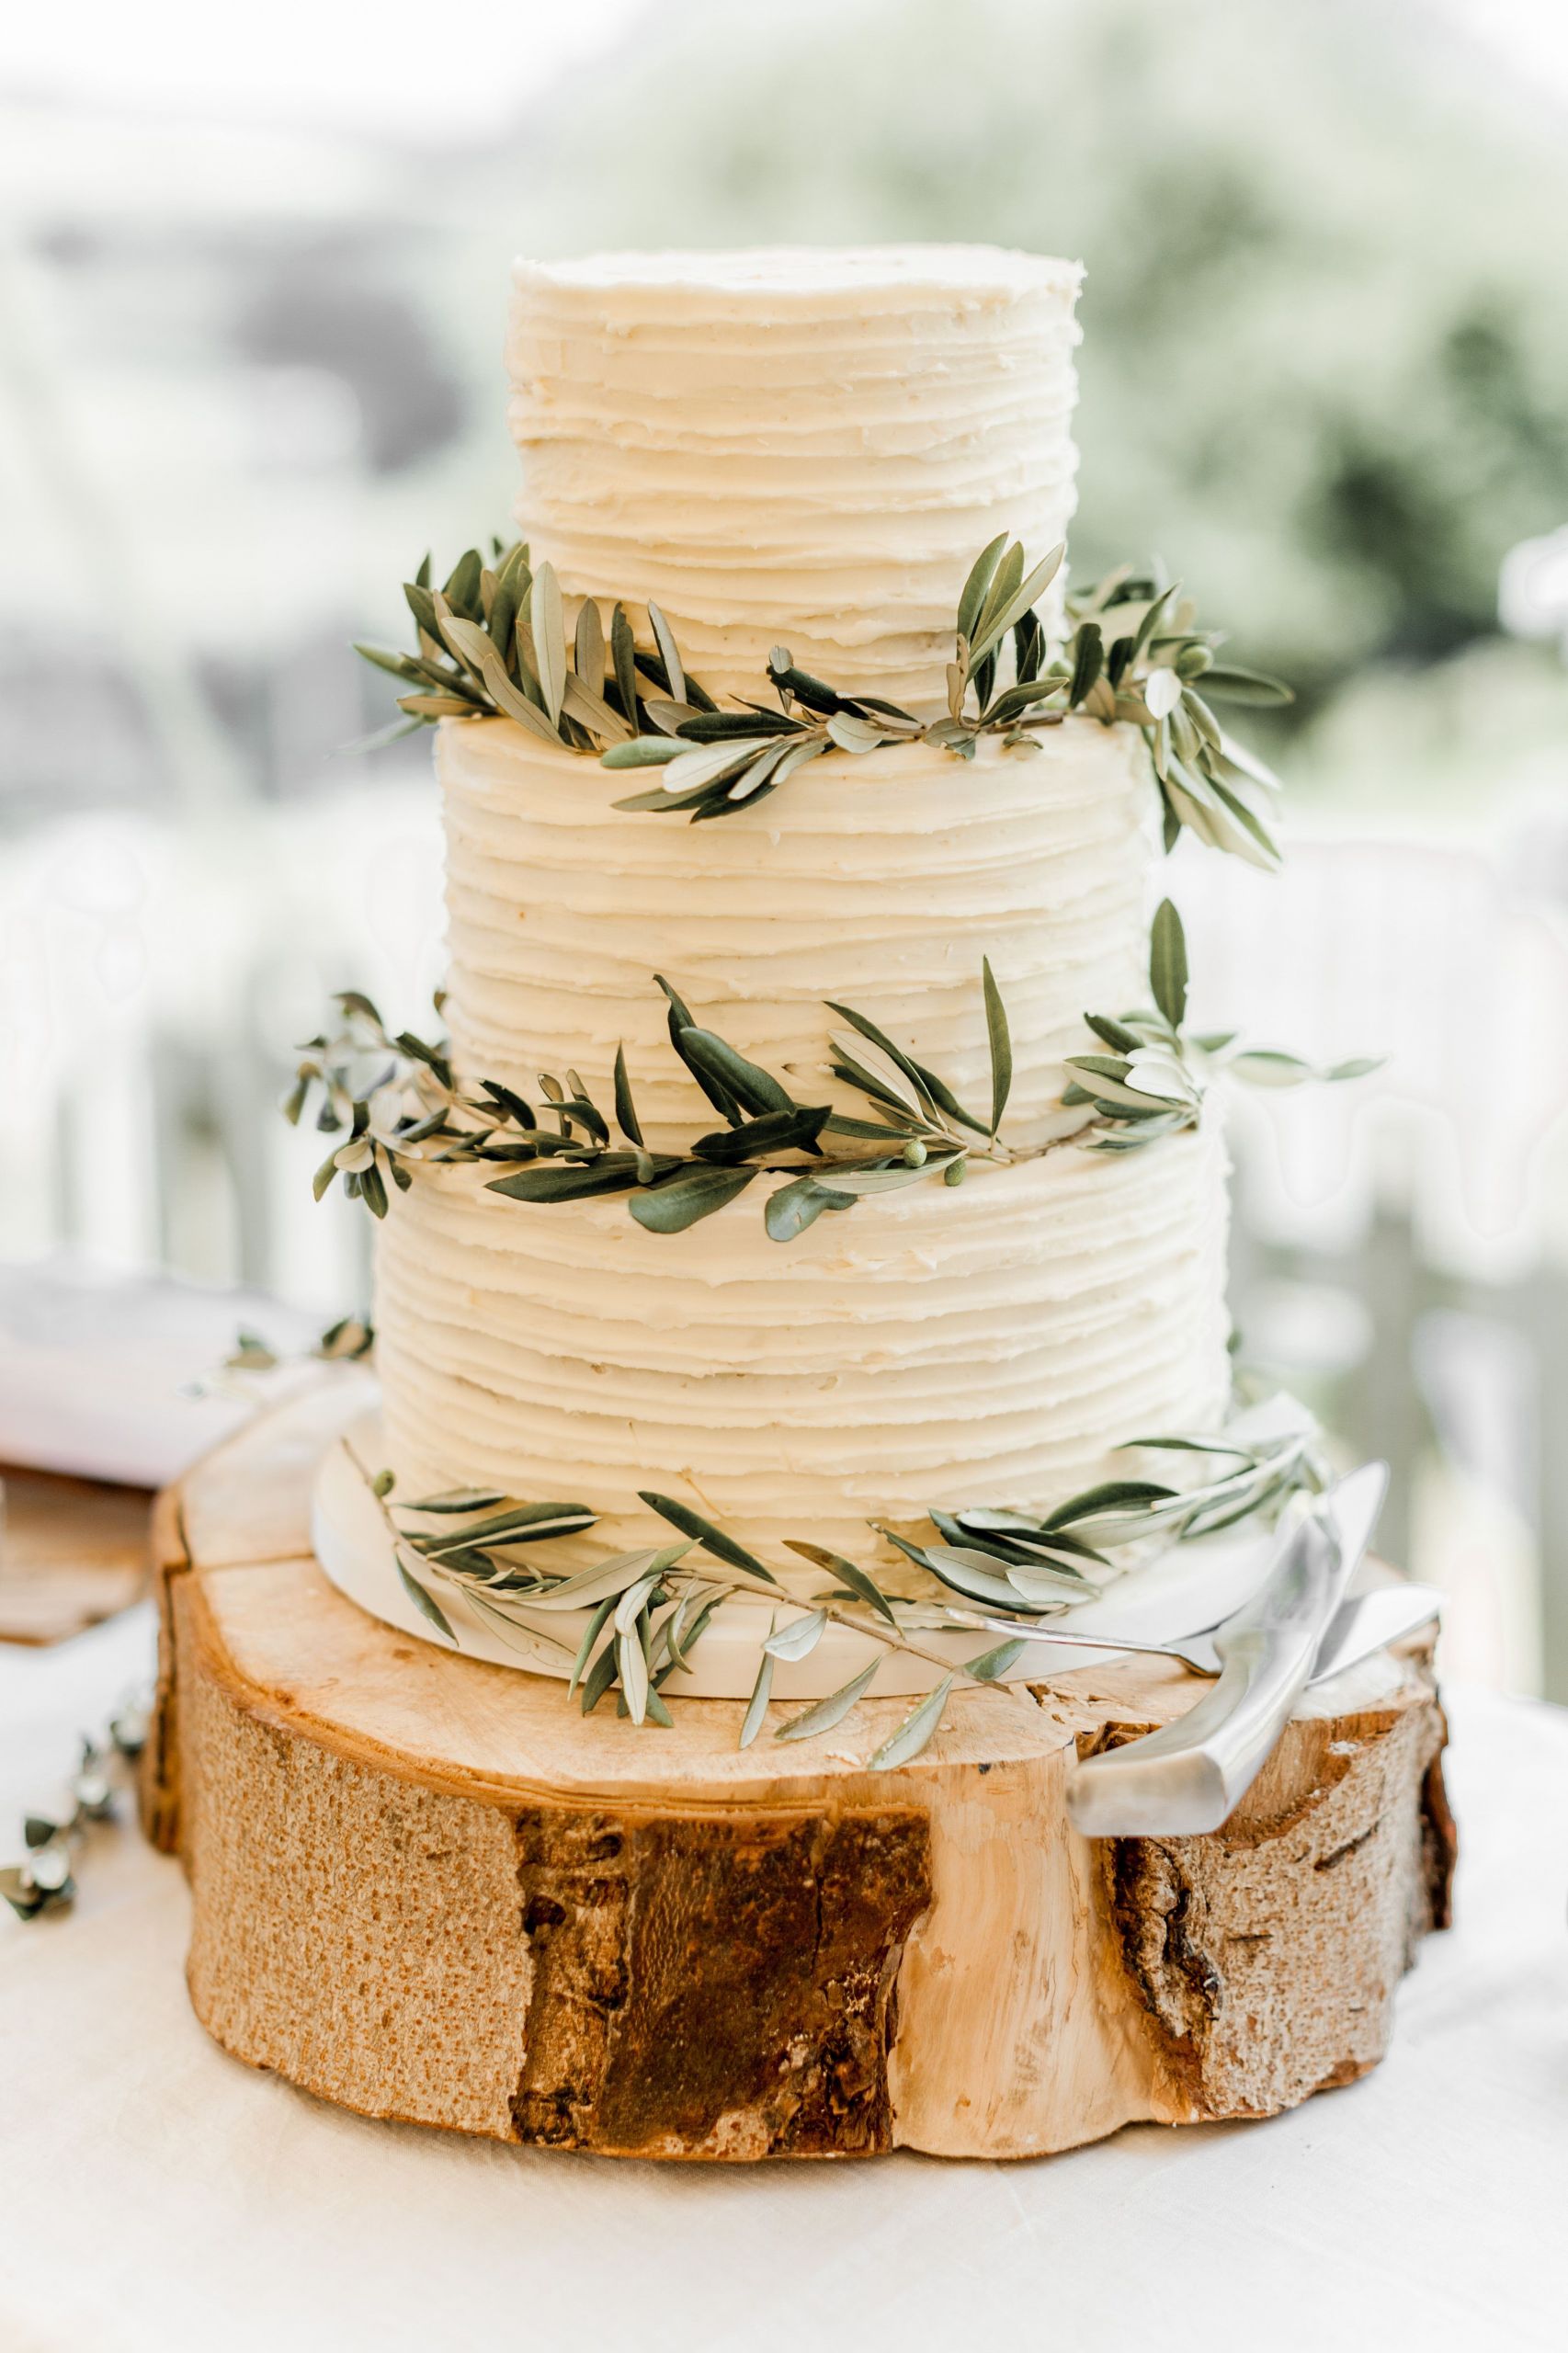 Simple Rustic Wedding Cakes
 Rustic Wedding Cake with Olive Leaves for Vineyard Wedding